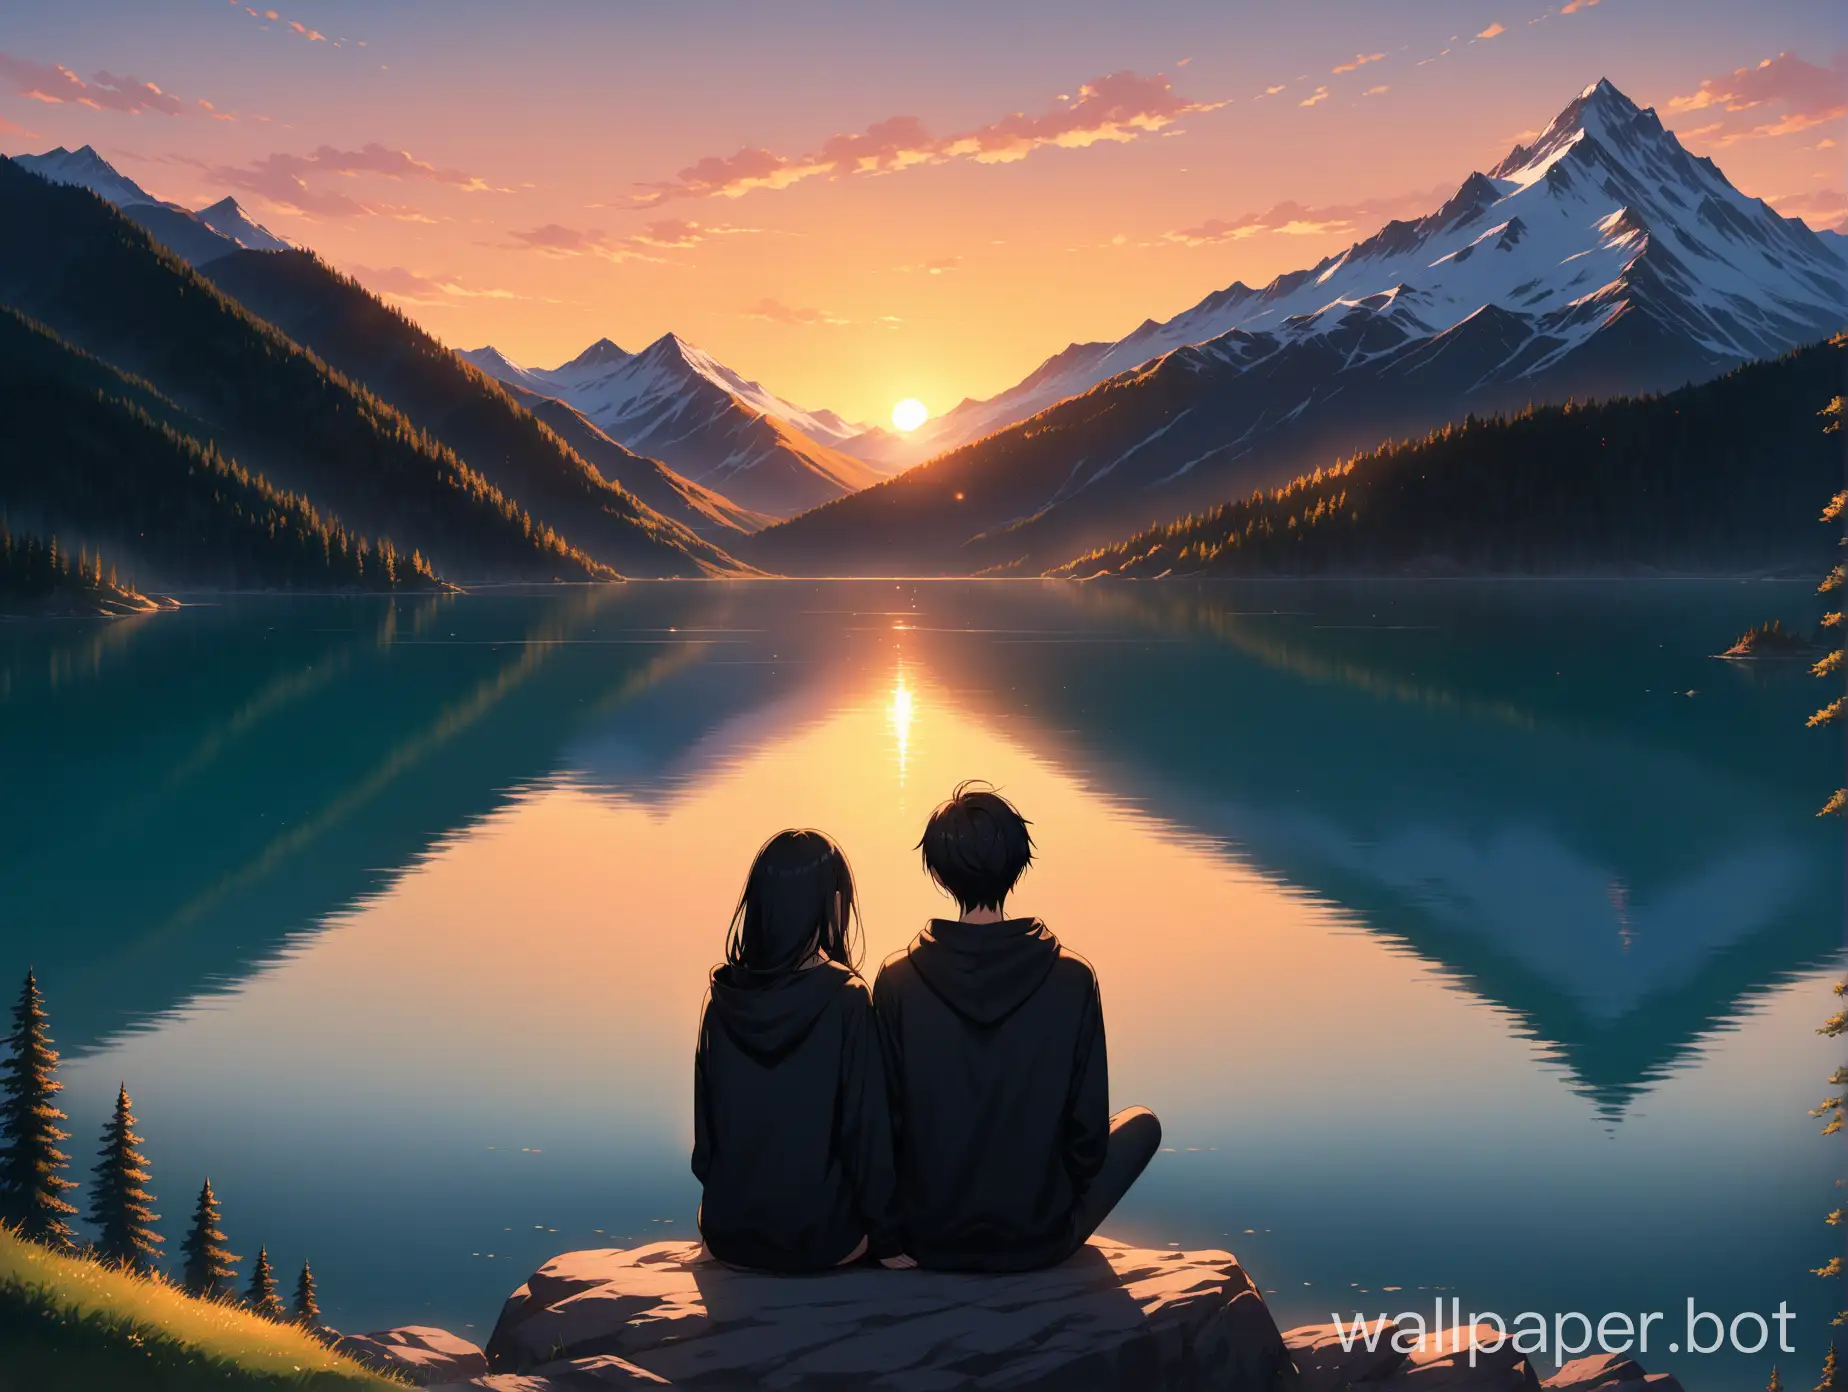 high-res, masterpiece, 4k, 8k, lake, mountain, forest, sunset, boy and girl, in black hoodies, black hair